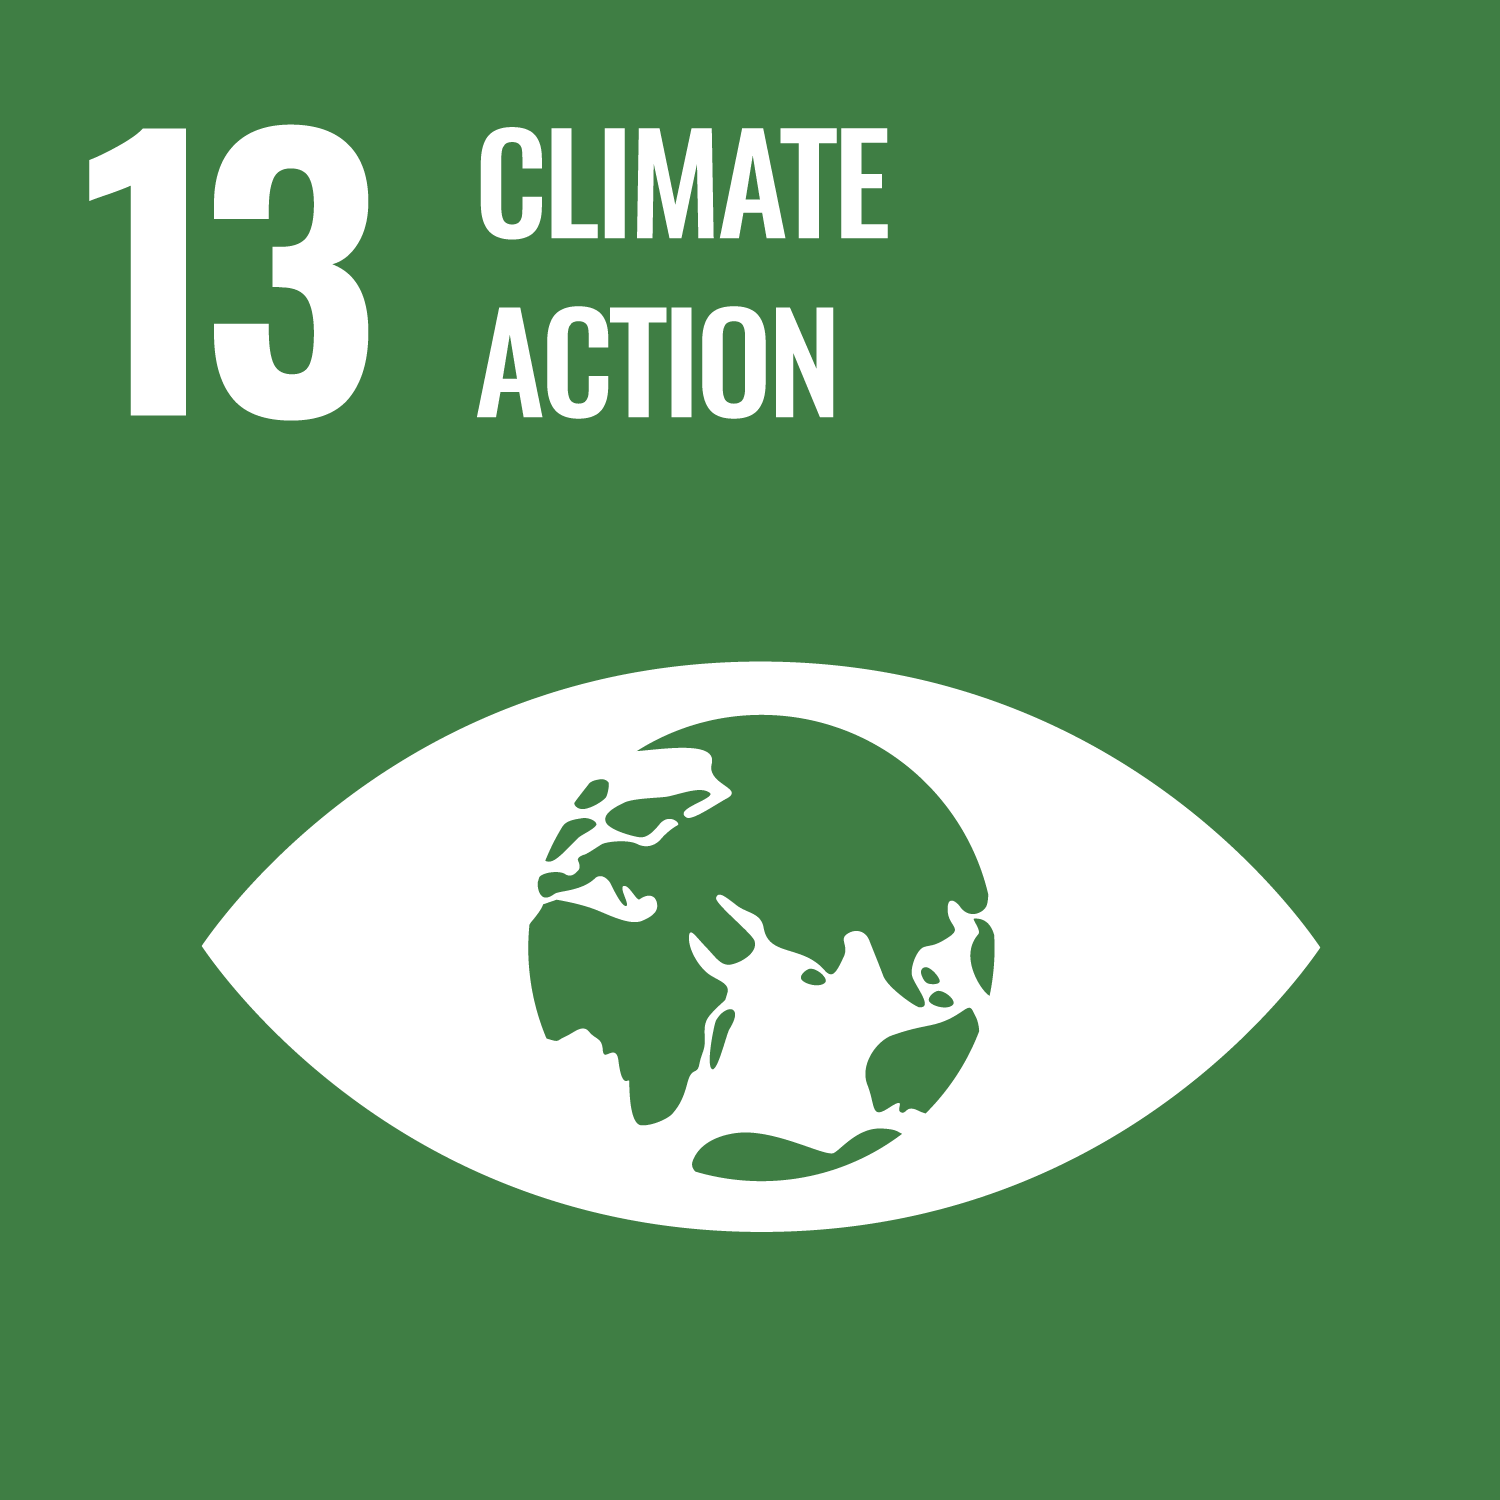 ［Goal 13］ Climate Action